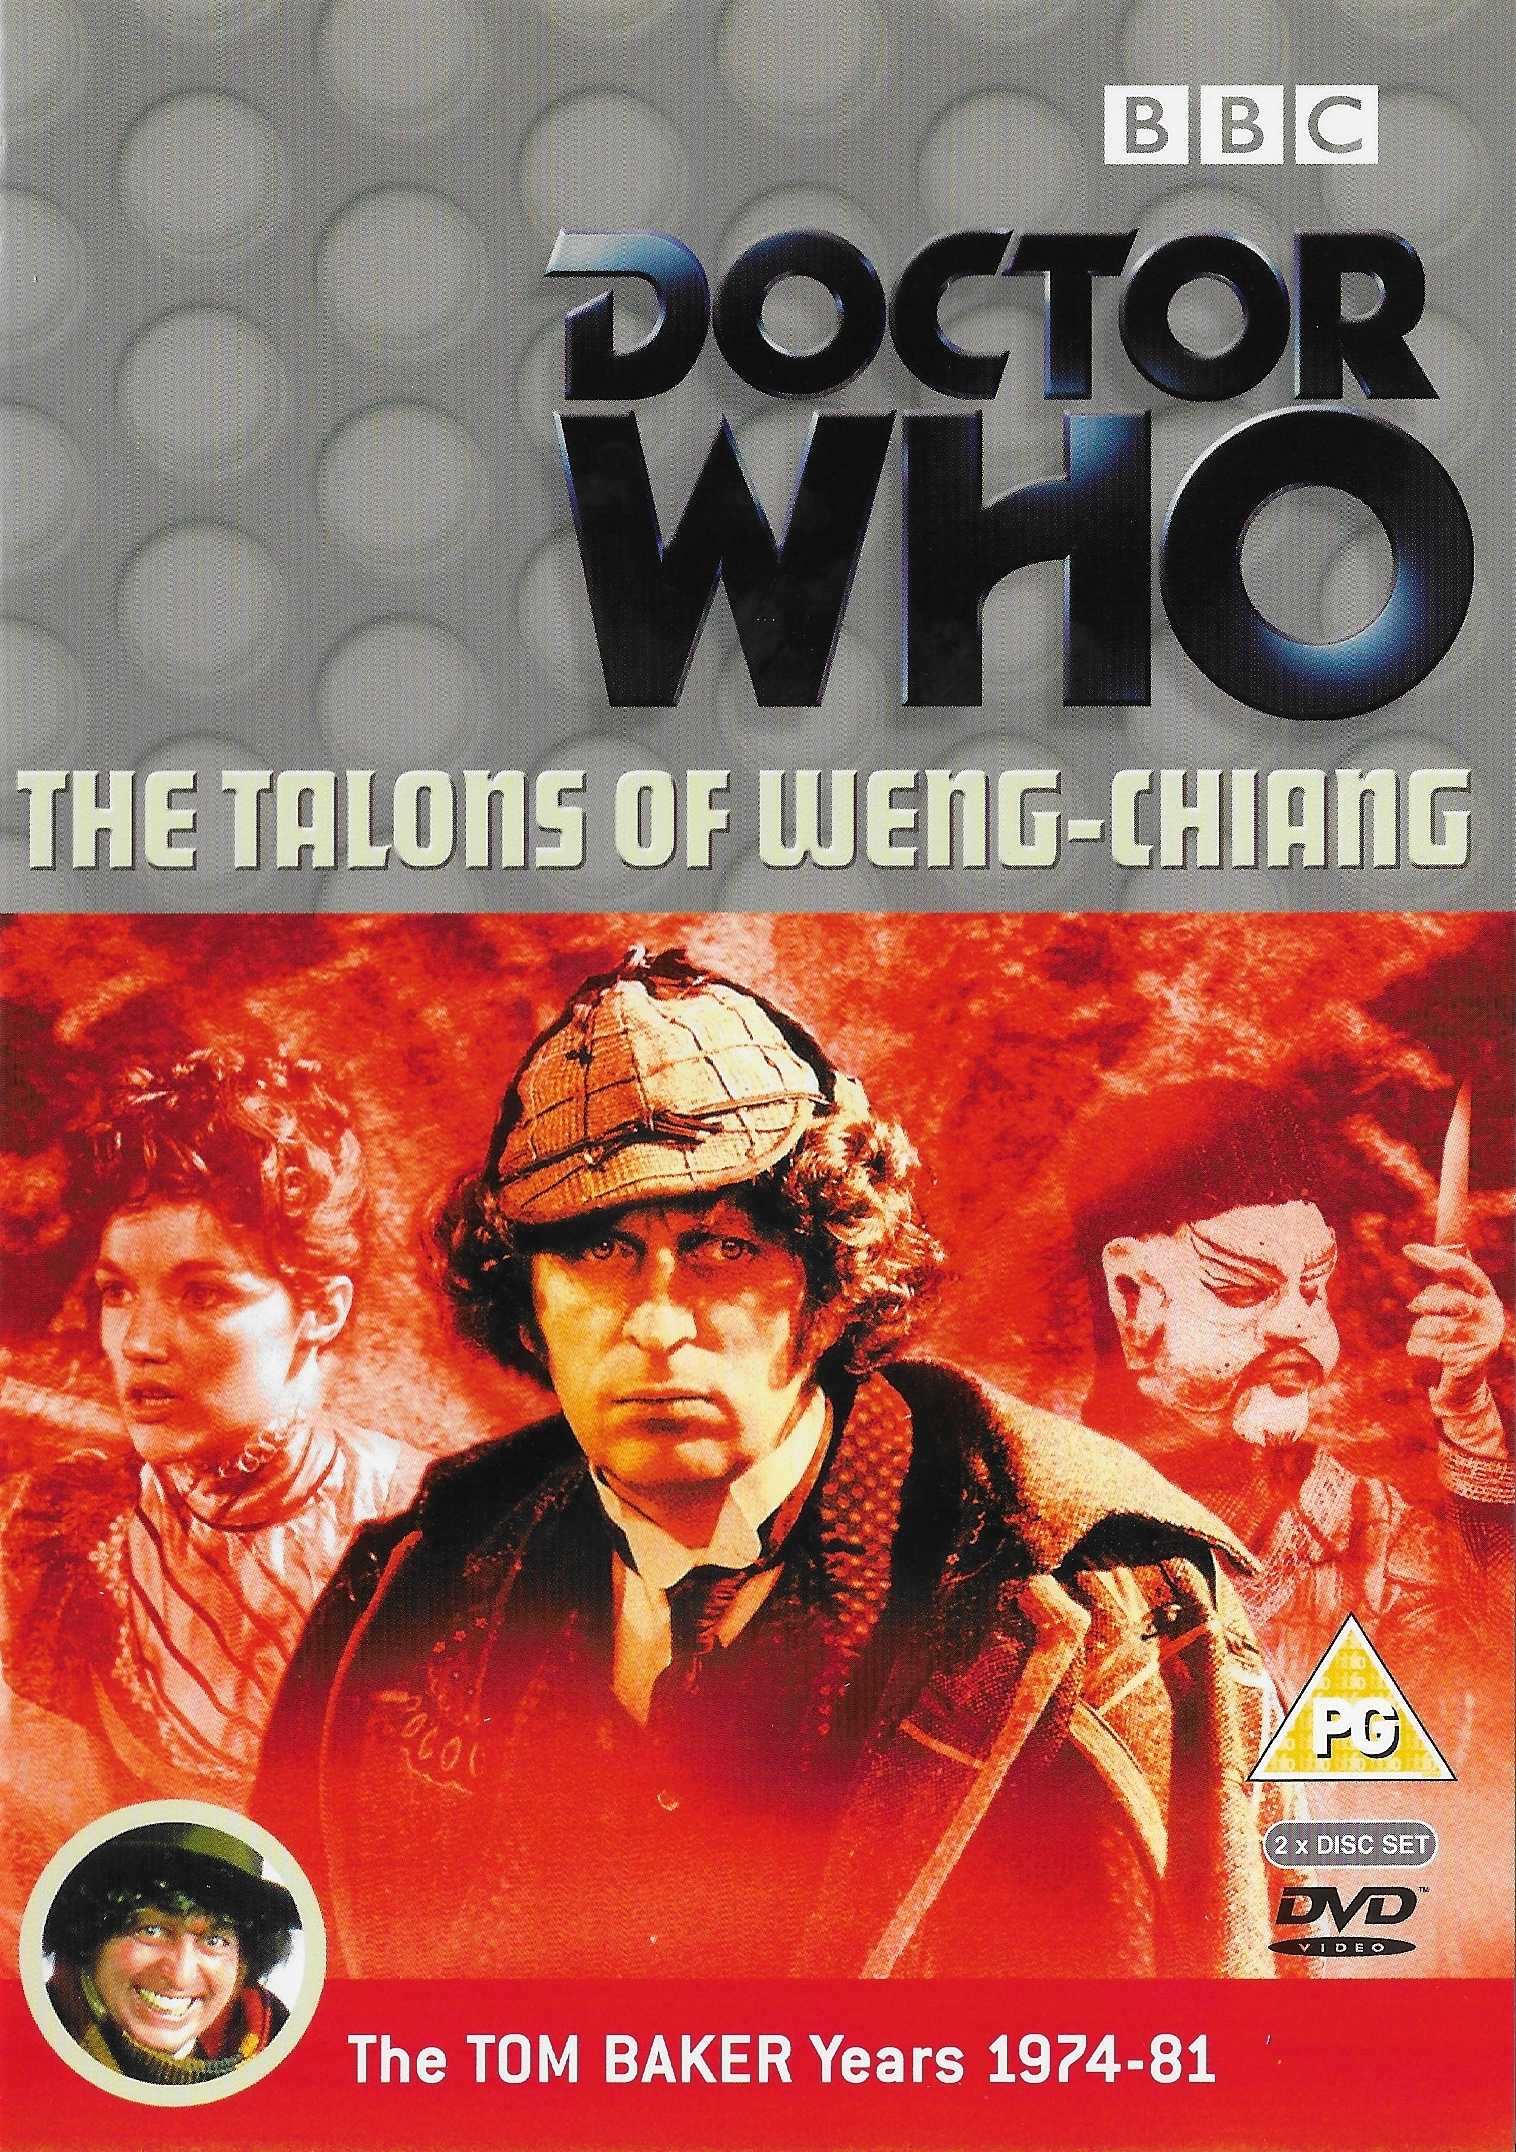 Picture of BBCDVD 1152 Doctor Who - The talons of Weng-Chiang by artist Robert Holmes from the BBC dvds - Records and Tapes library